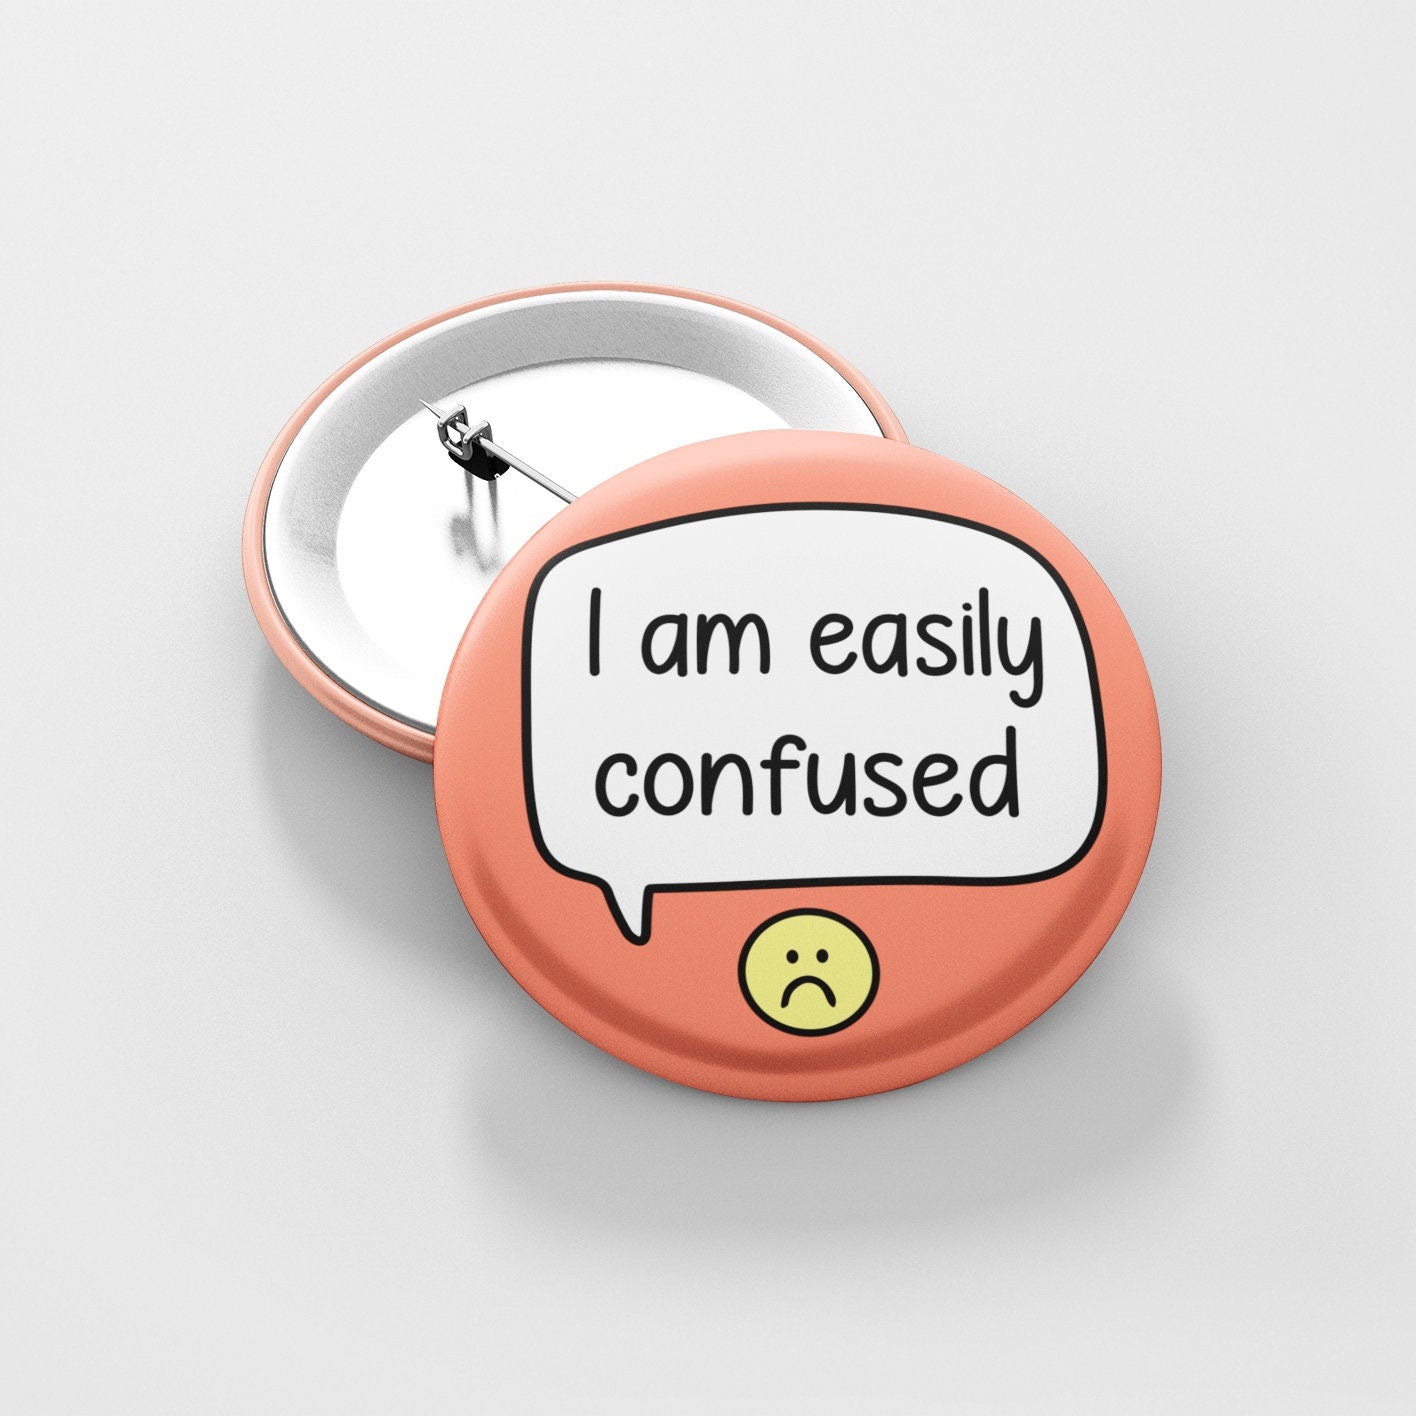 I Am Easily Confused Badge Pin | Support Gift - Awareness Pins